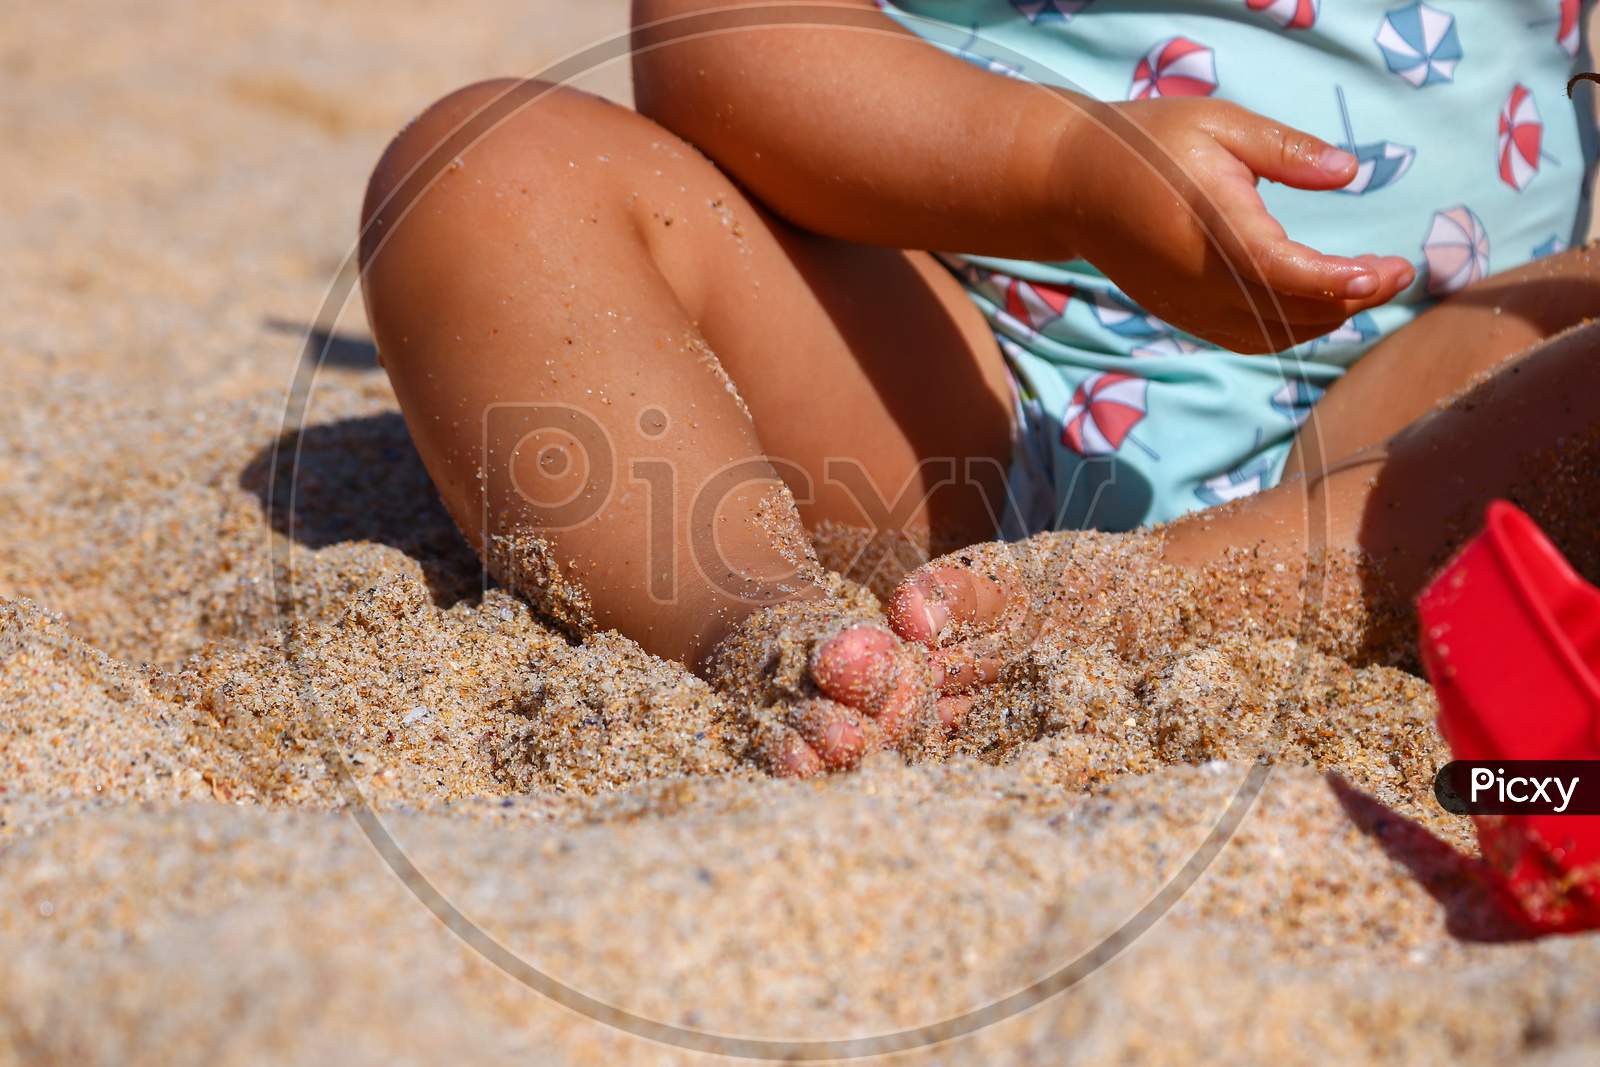 Little child with his feet in the sand playing on the beach.